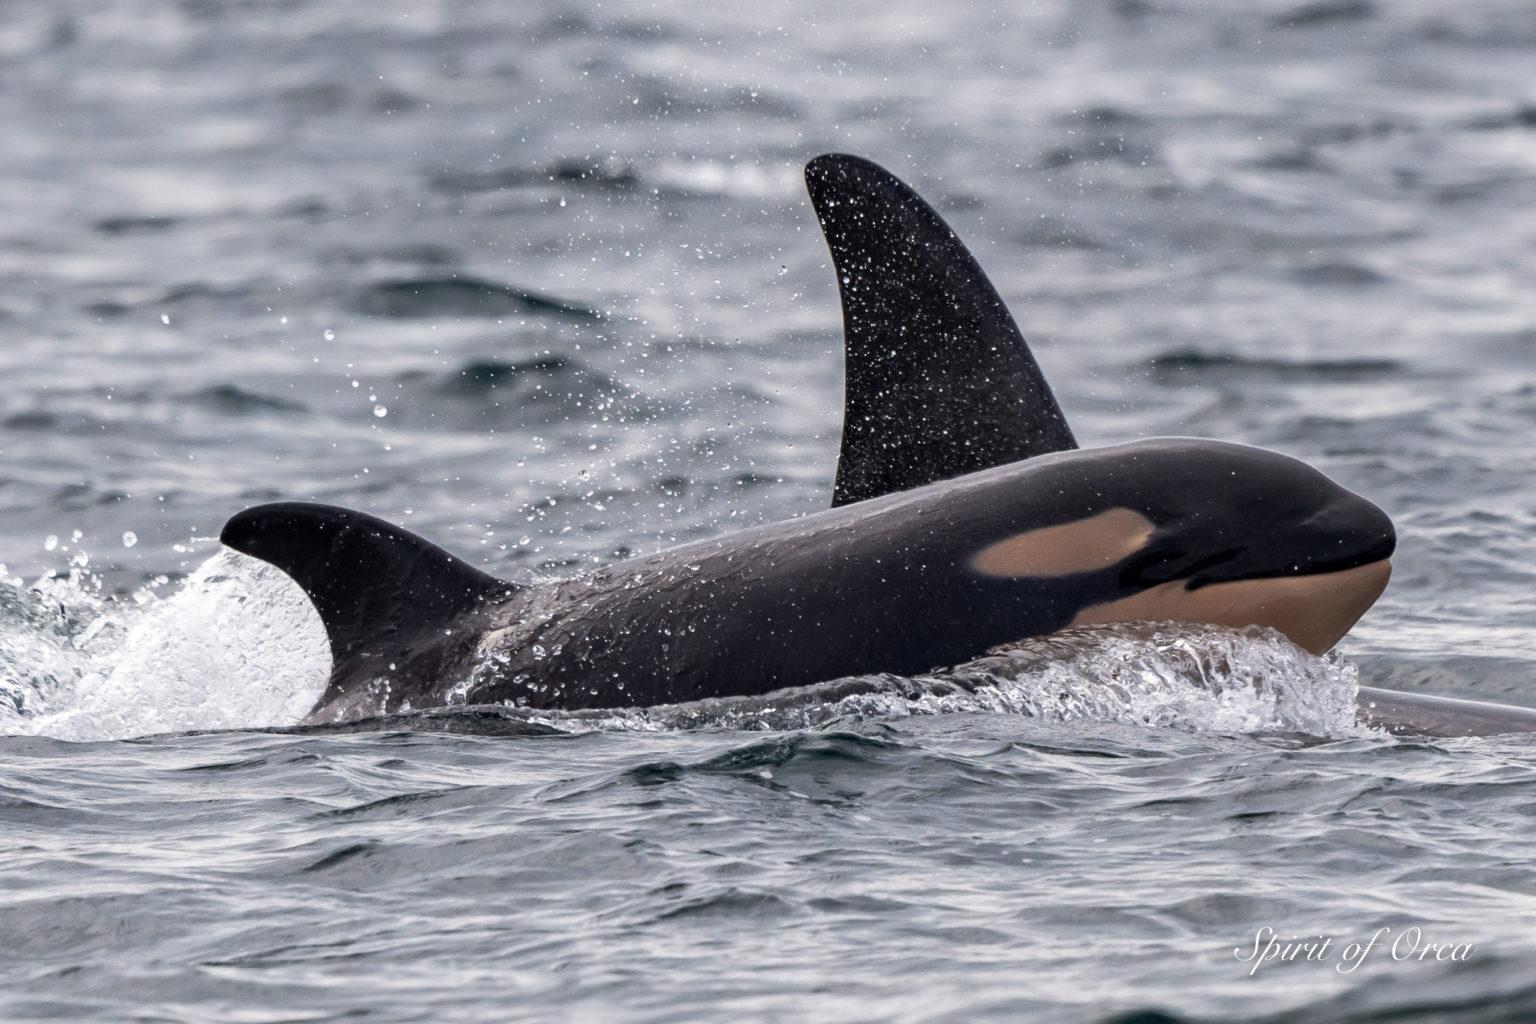 Meet J50 - "The World's Happiest Baby Orca"